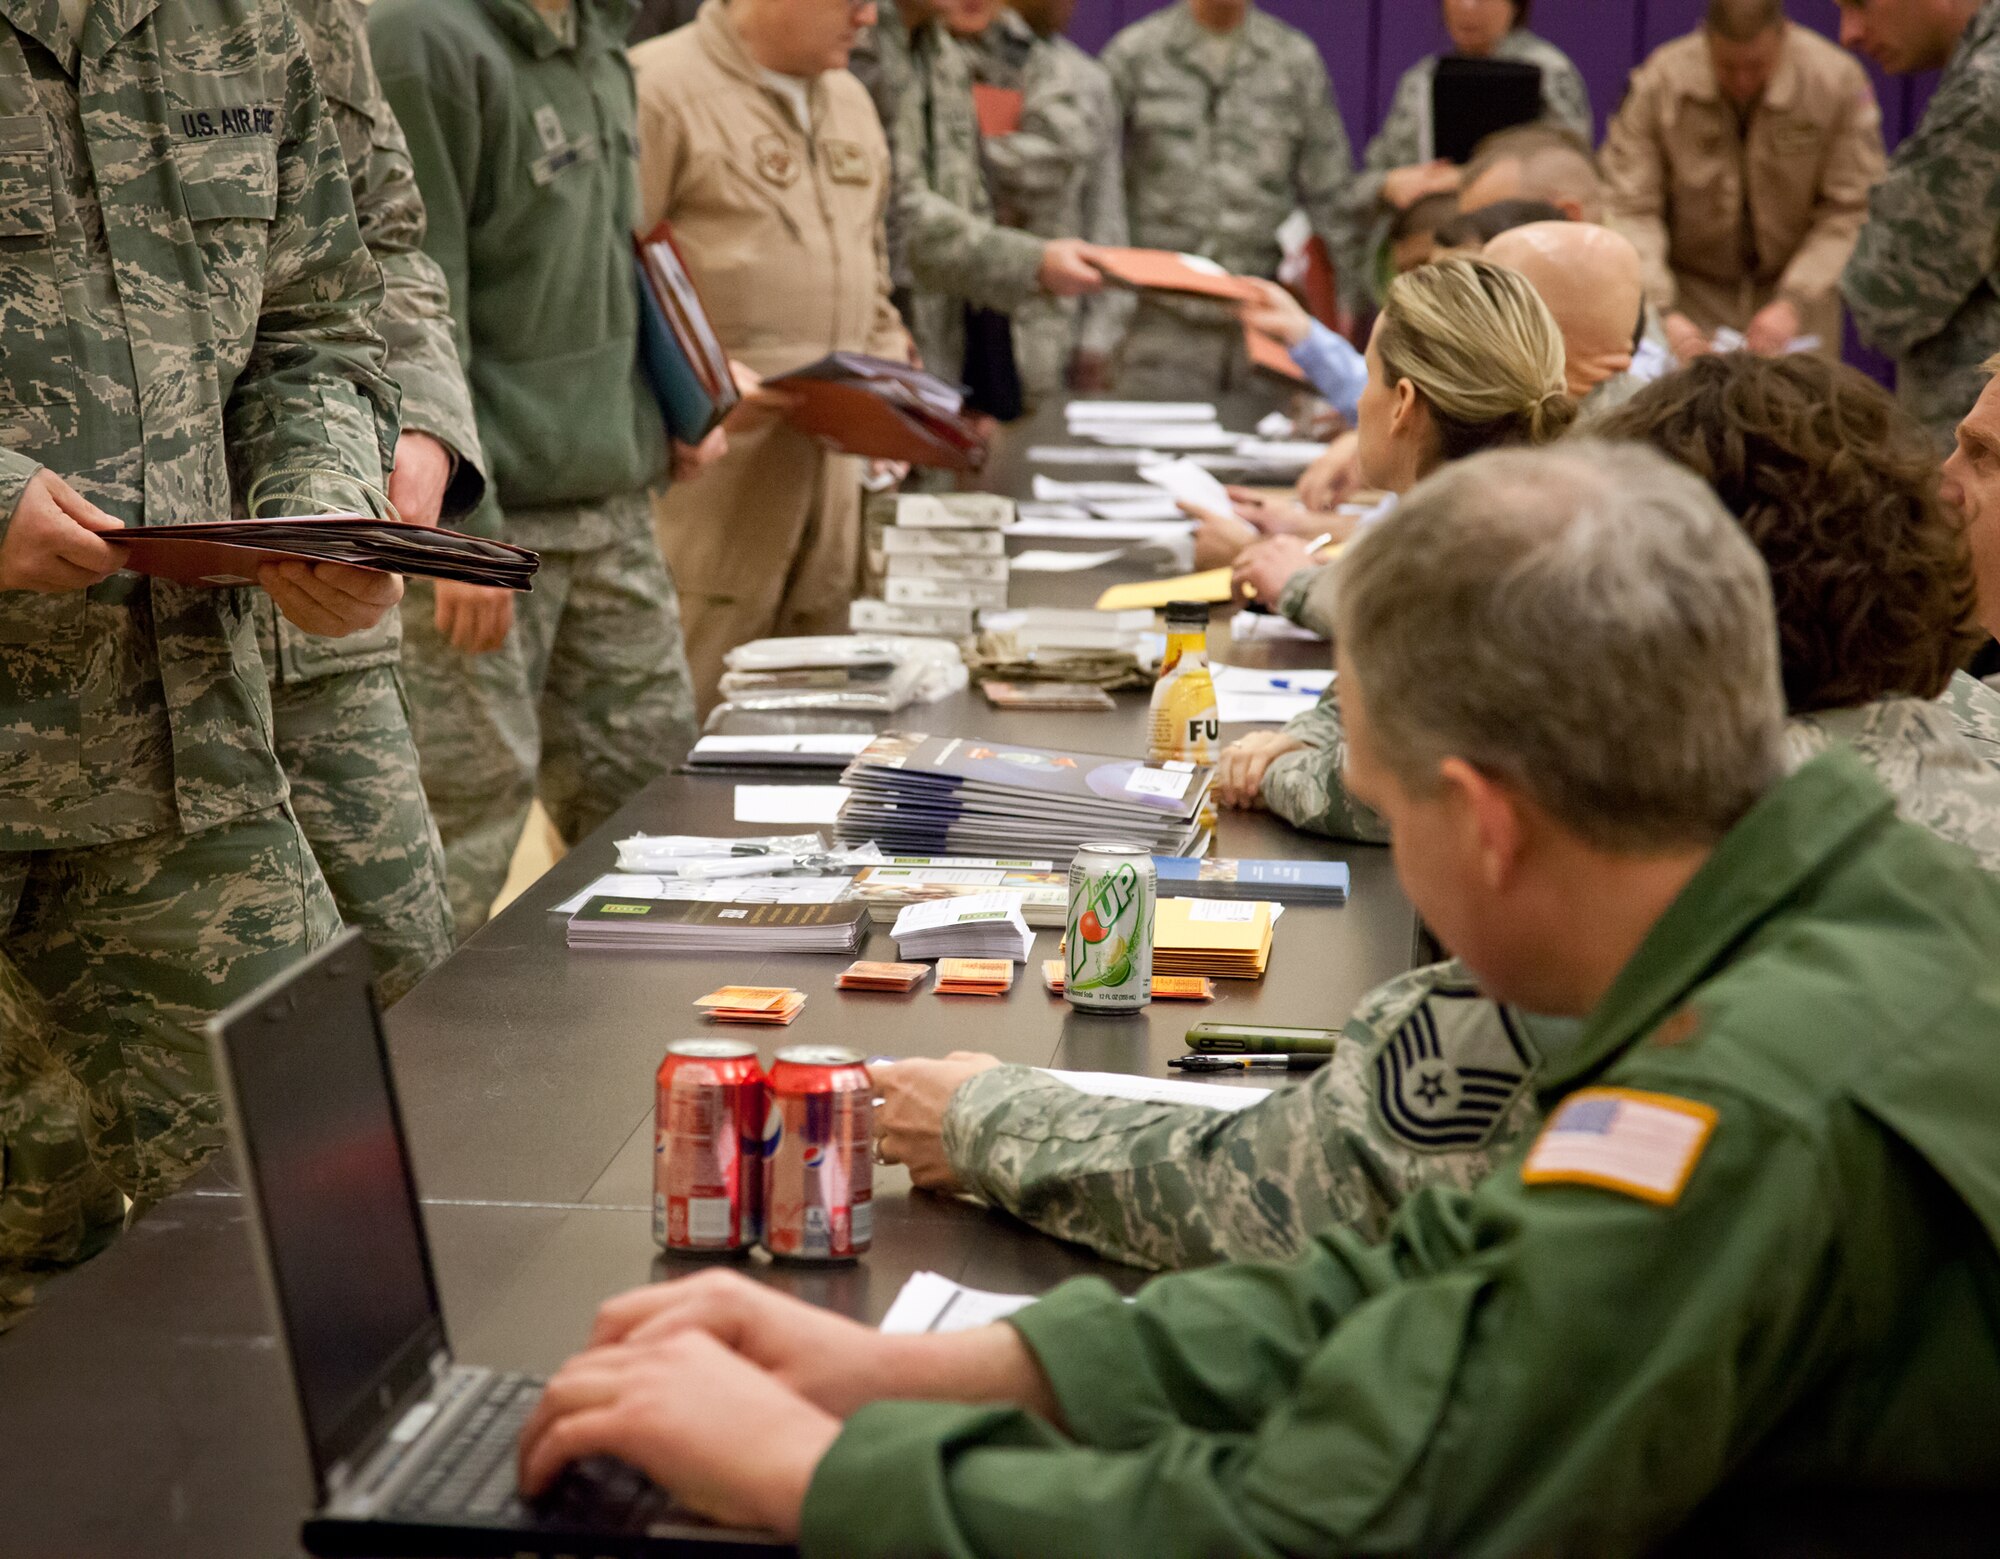 Citizen Airmen from the 934th Airlift Wing processed through all of their paperwork today to prepare for their upcoming deployment to Southwest Asia.  They checked with representatives from various supporting agencies to help the deployment go smoothly.  (Air Force Photo/Shannon McKay)